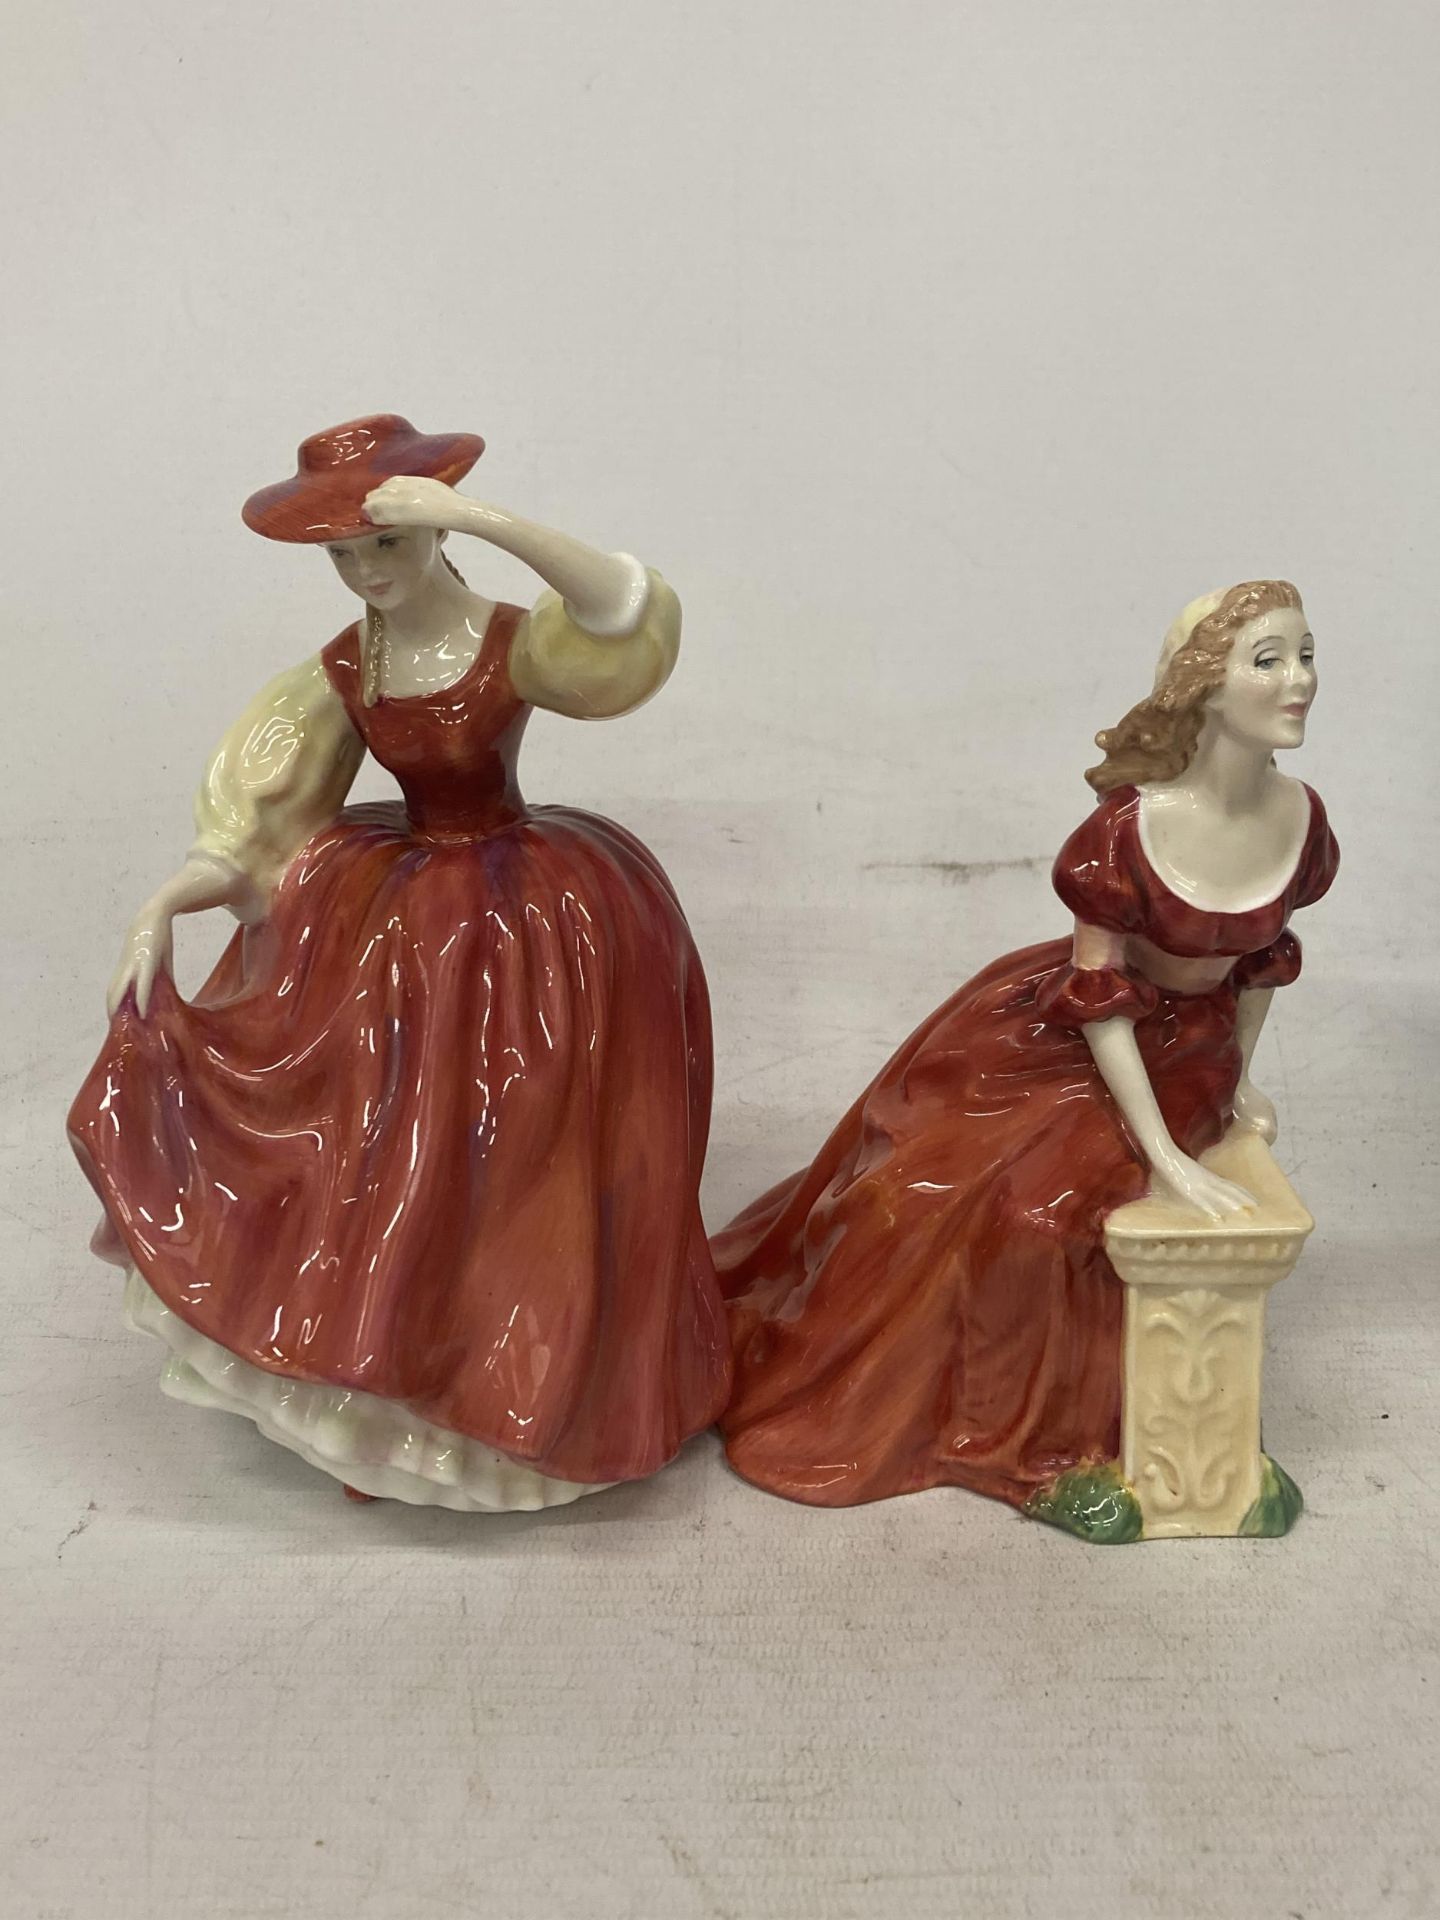 TWO ROYAL DOULTON FIGURINES "BUTTERCUP" AND "JUDITH"